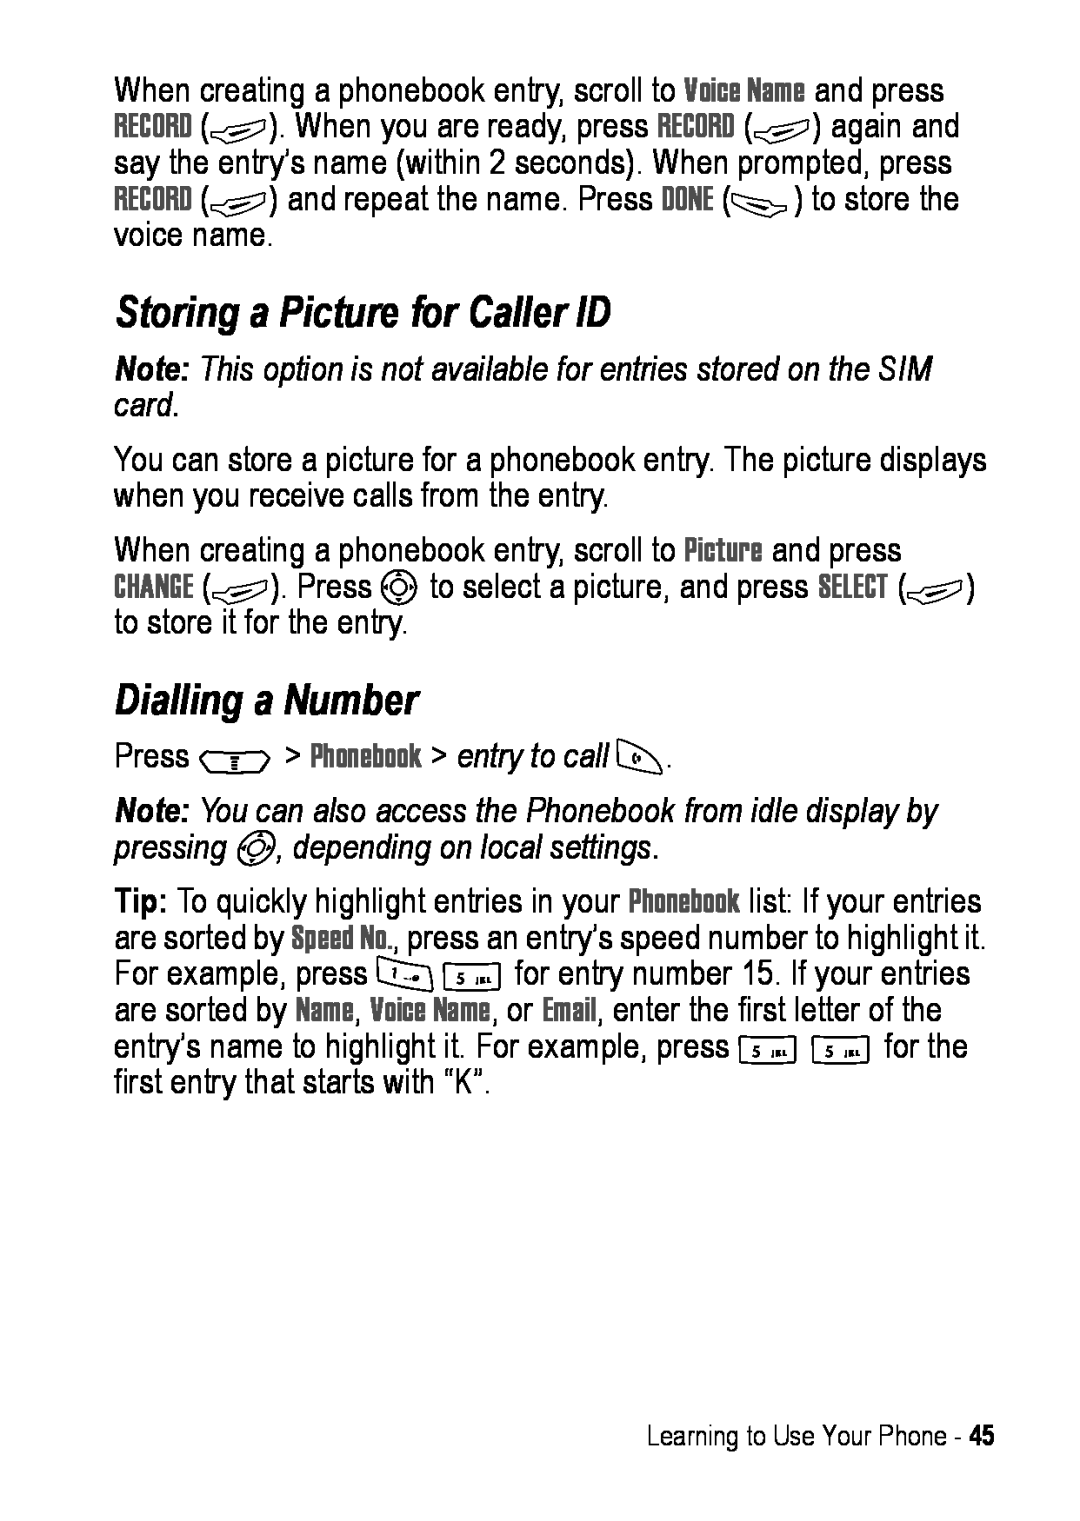 Motorola C390 manual Storing a Picture for Caller ID, Dialling a Number, Press M Phonebook entry to call N 